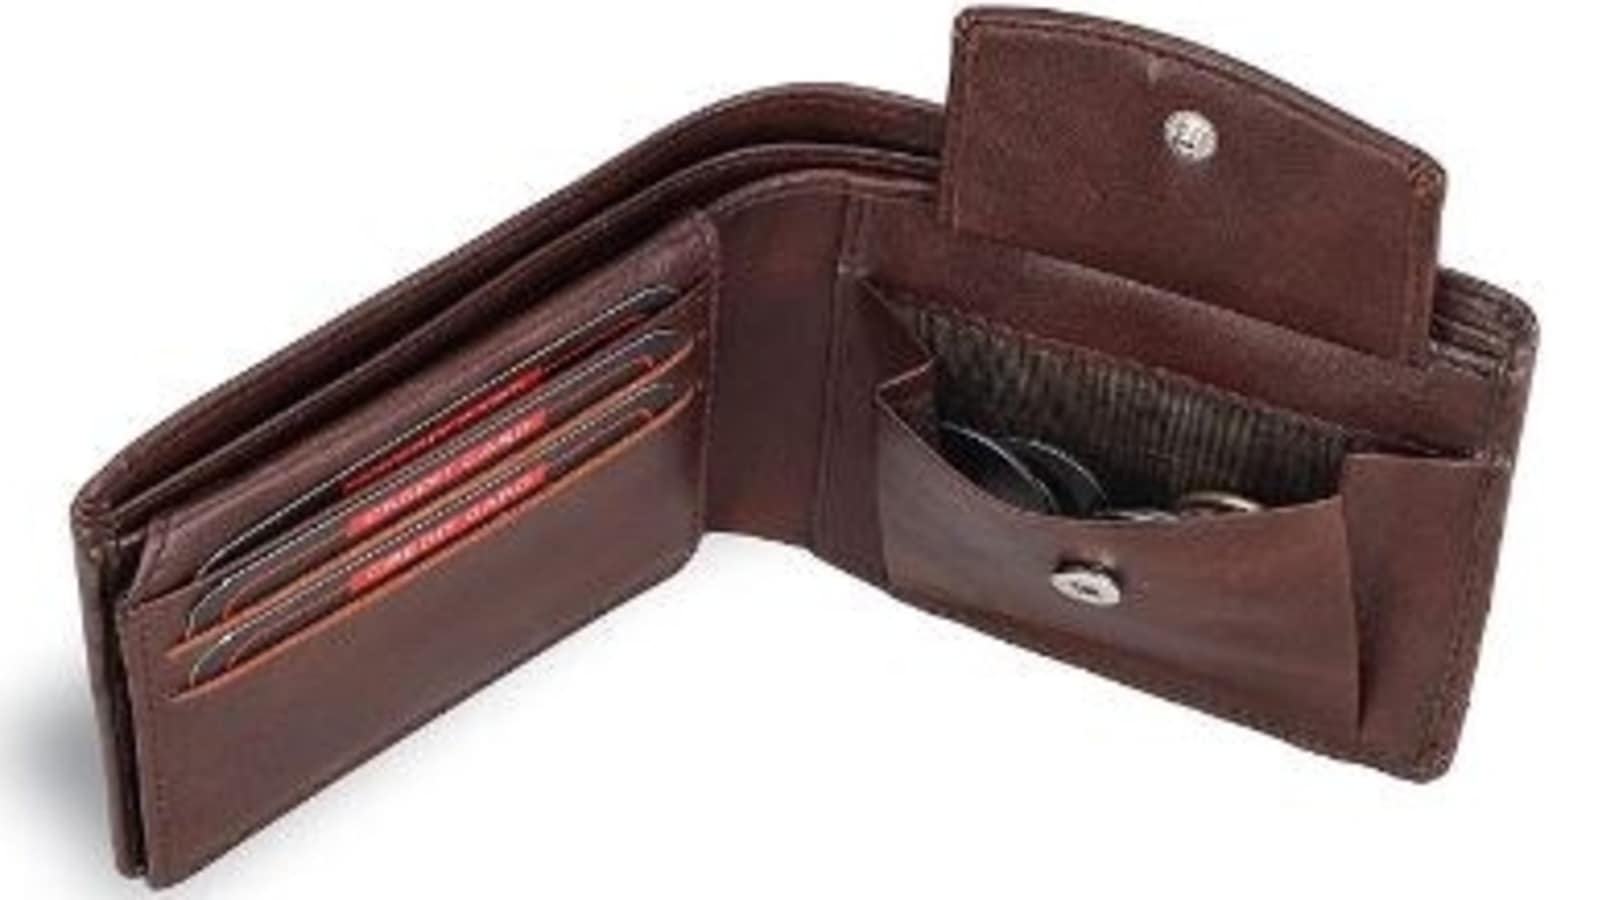 Purses for men should be compact, have enough space for cards, cash and  coins